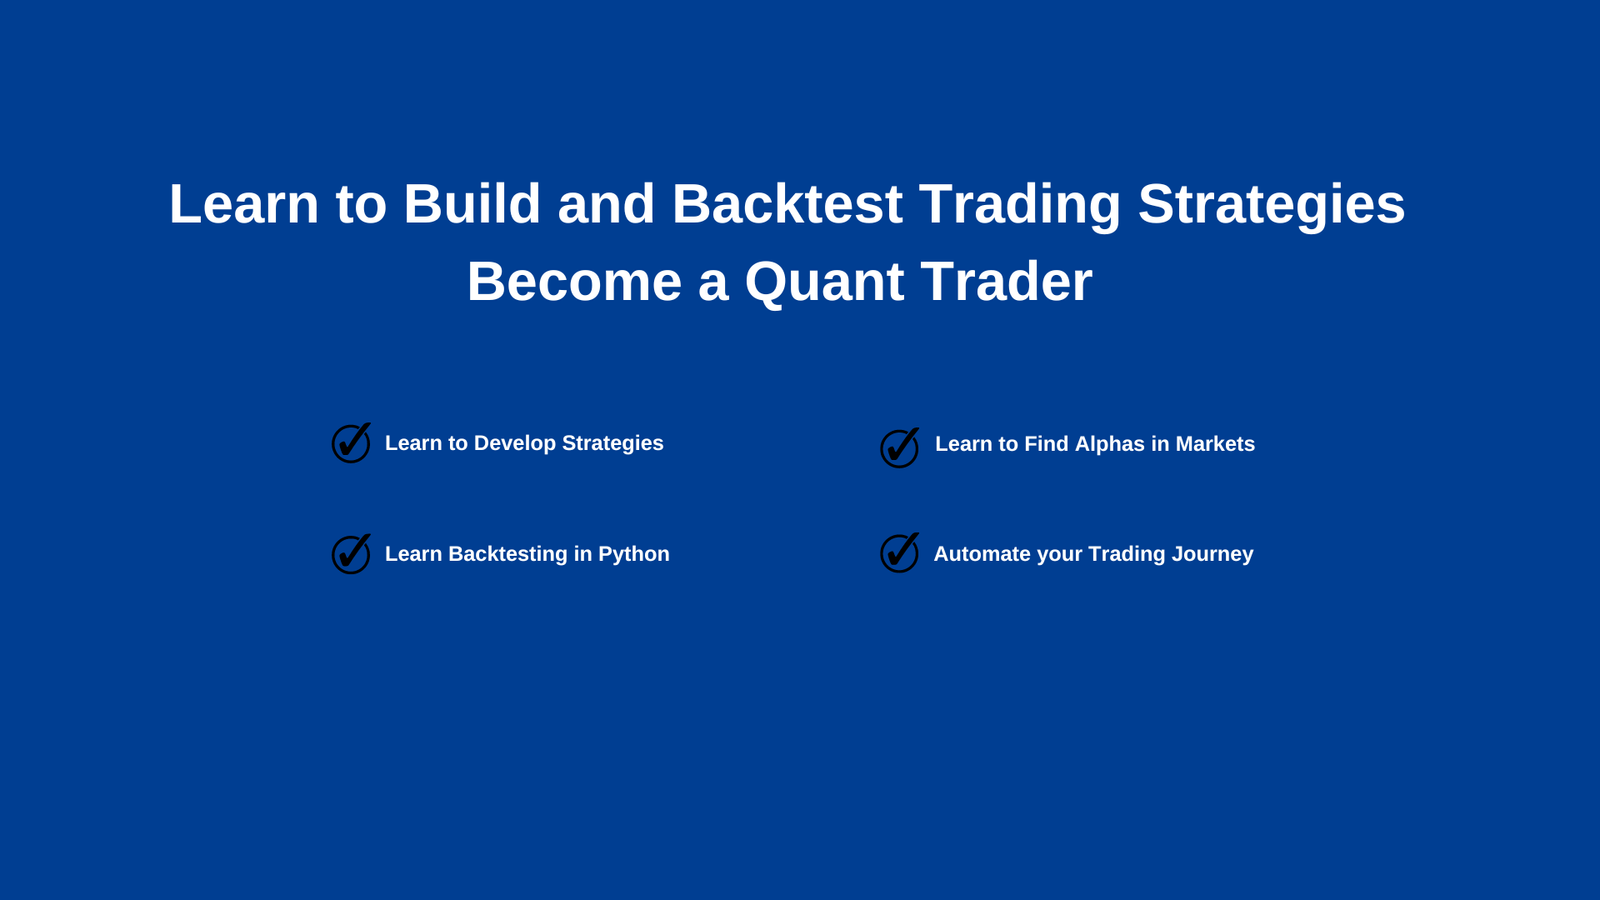 Learn to Build and Develop Trading Strategies. (2)